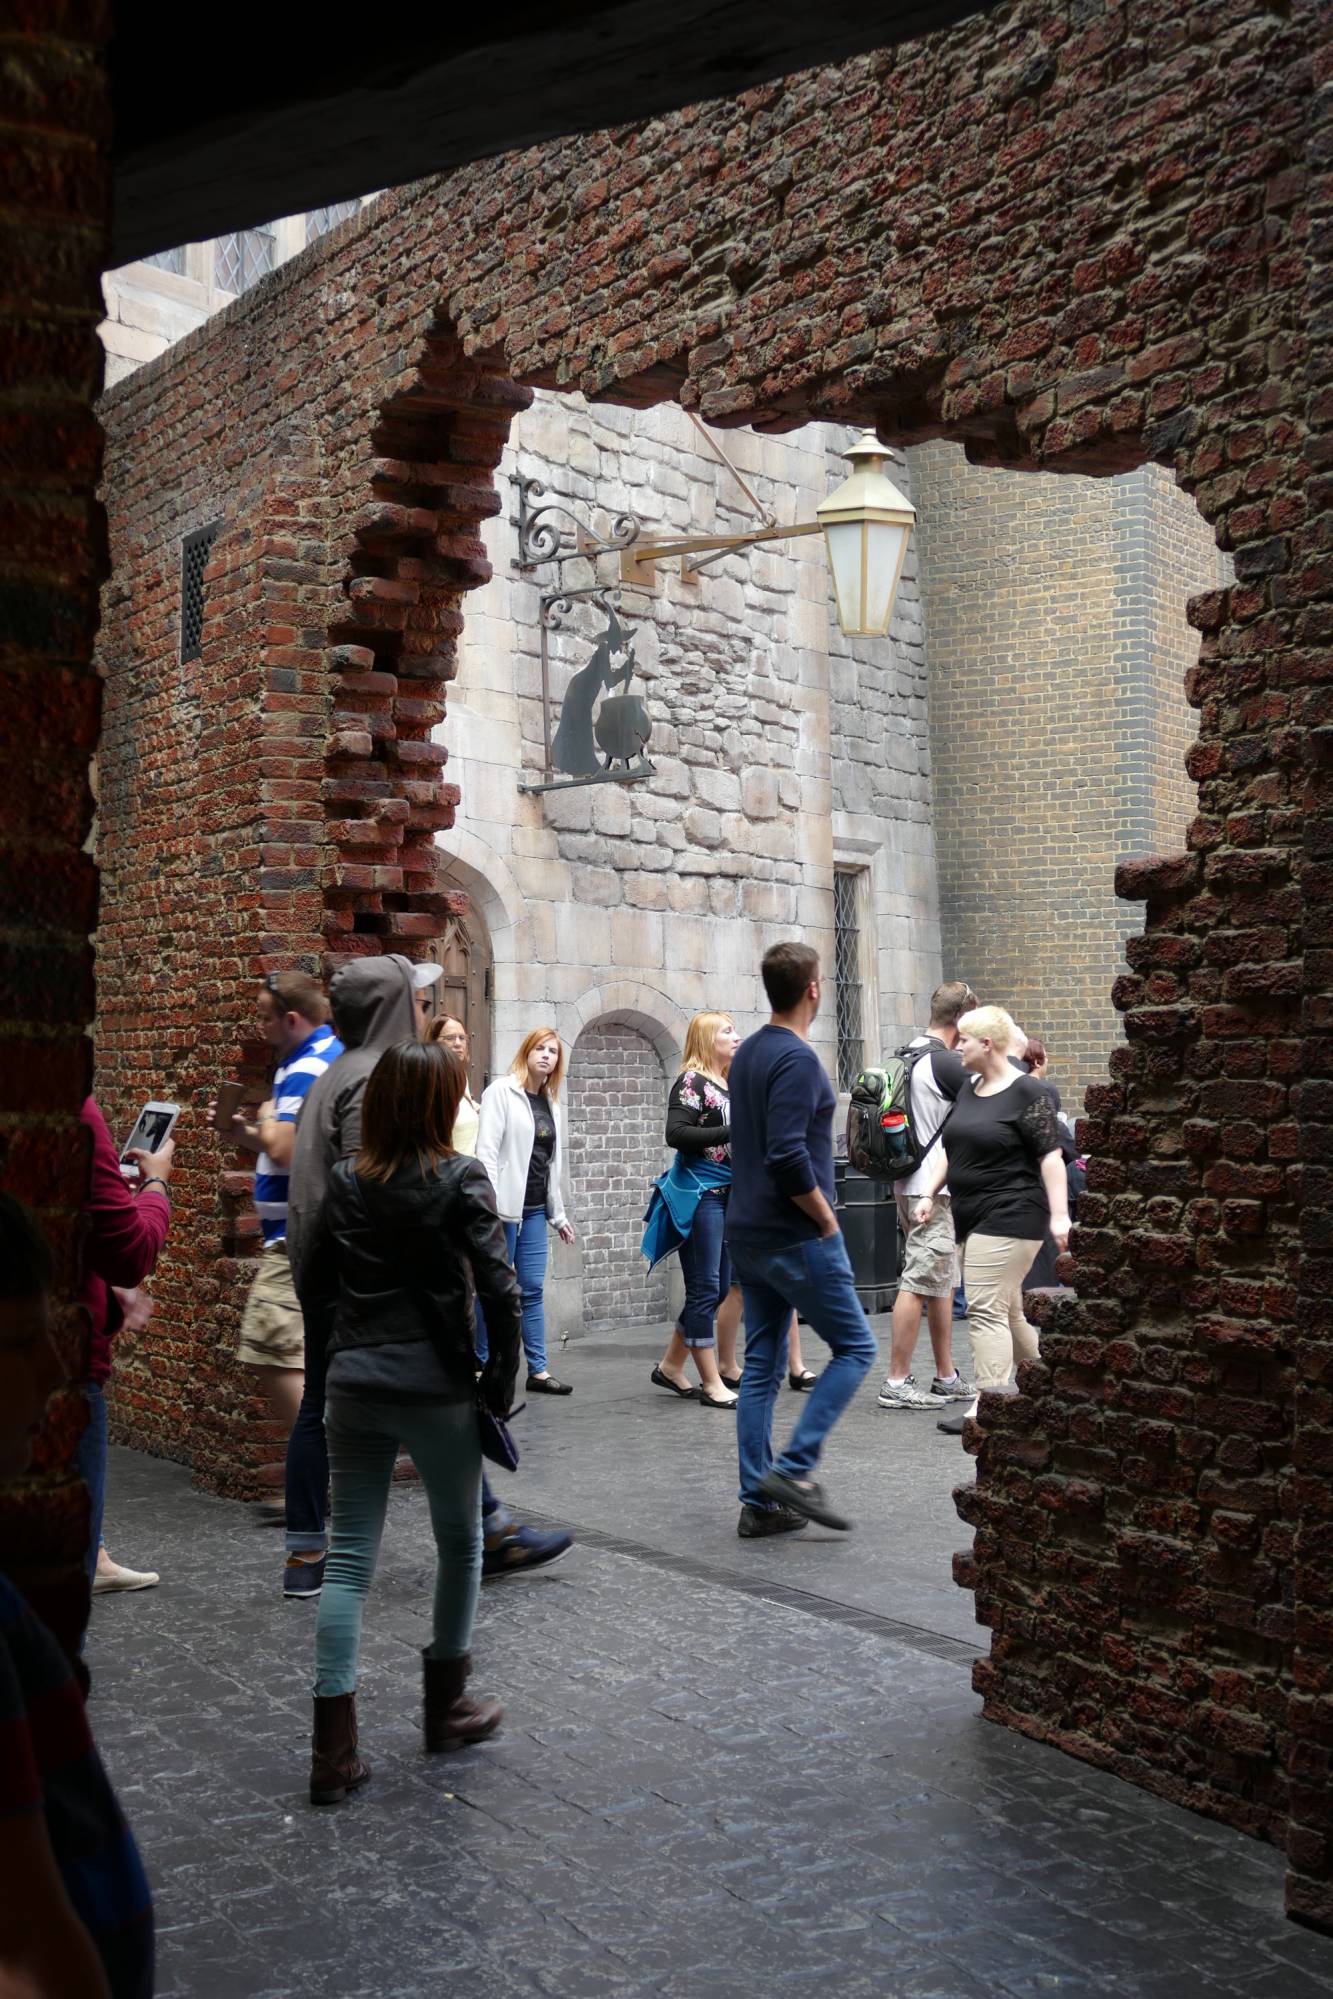 Diagon Alley - Wizarding World of Harry Potter at Universal Studios Florida